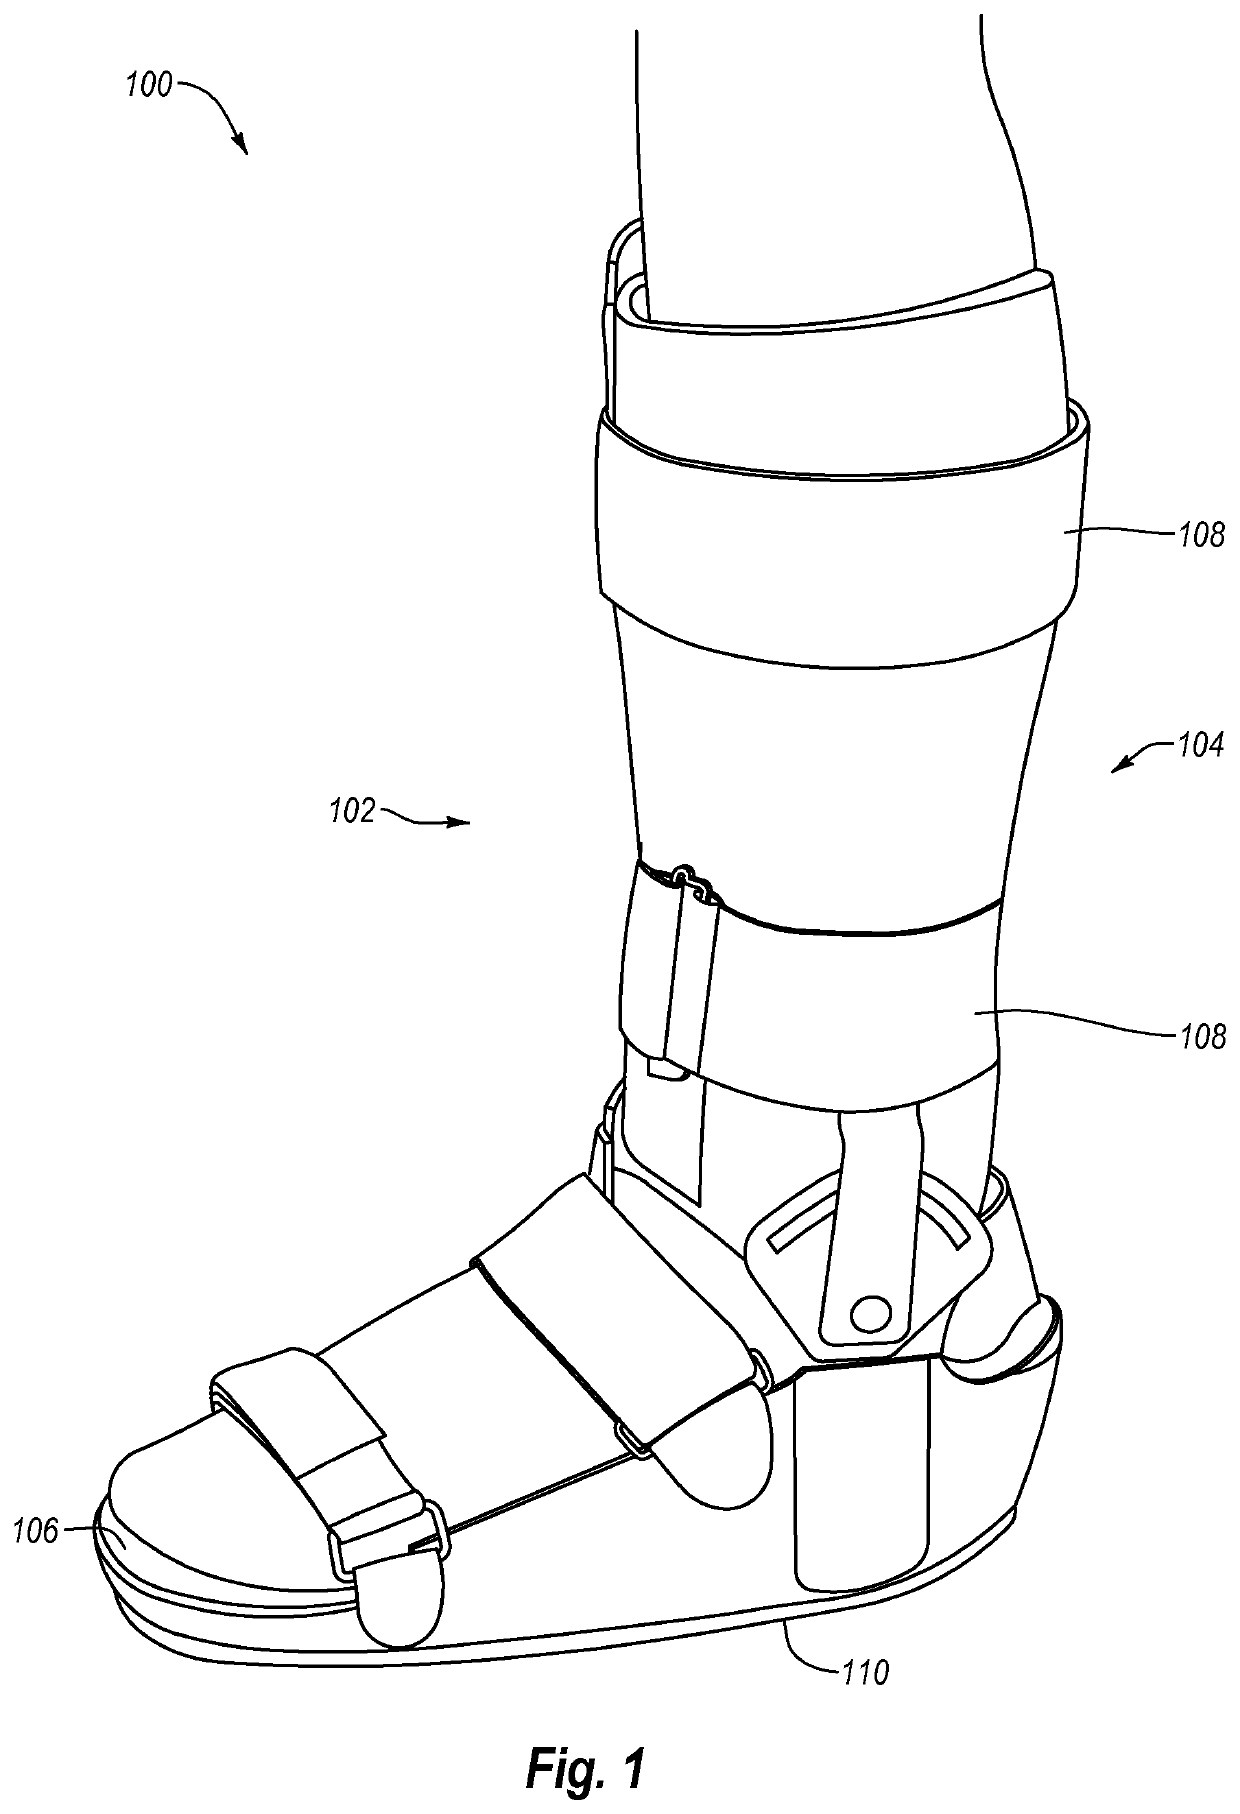 Systems, devices, and methods for providing foot loading feedback to patients and physicians during a period of partial weight bearing